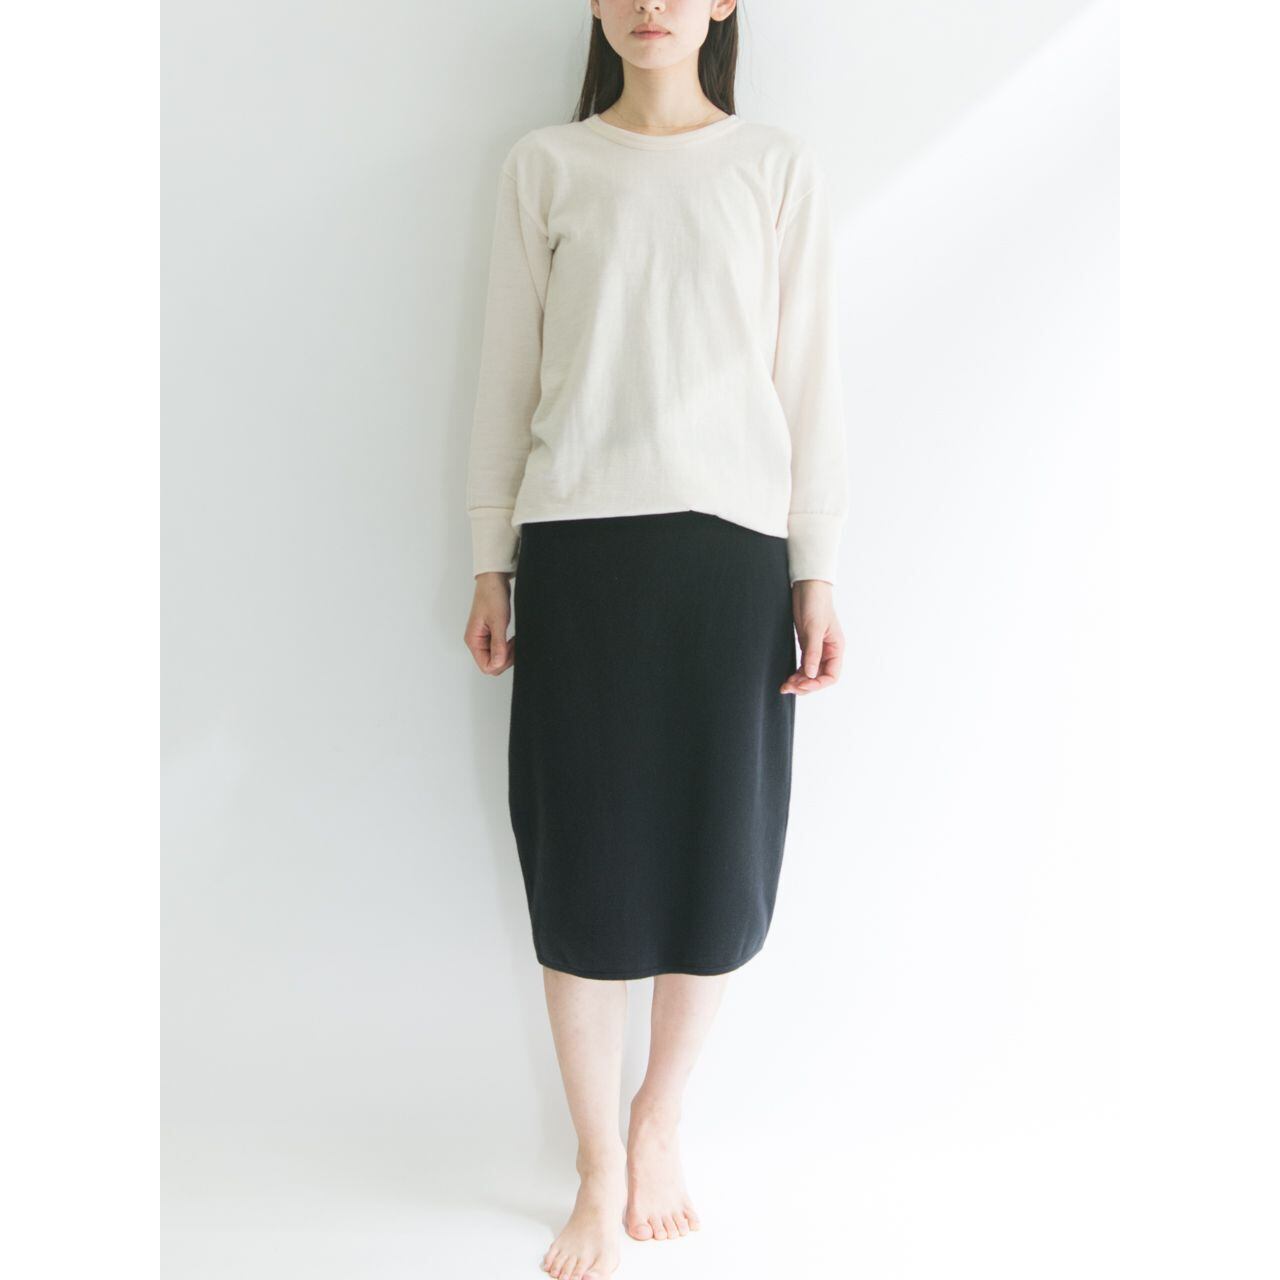 【RENA LANGE】Made in Italy 80's cotton knit cocoon skirt（レナランゲ イタリア製コットンニットコクーンスカート）4d